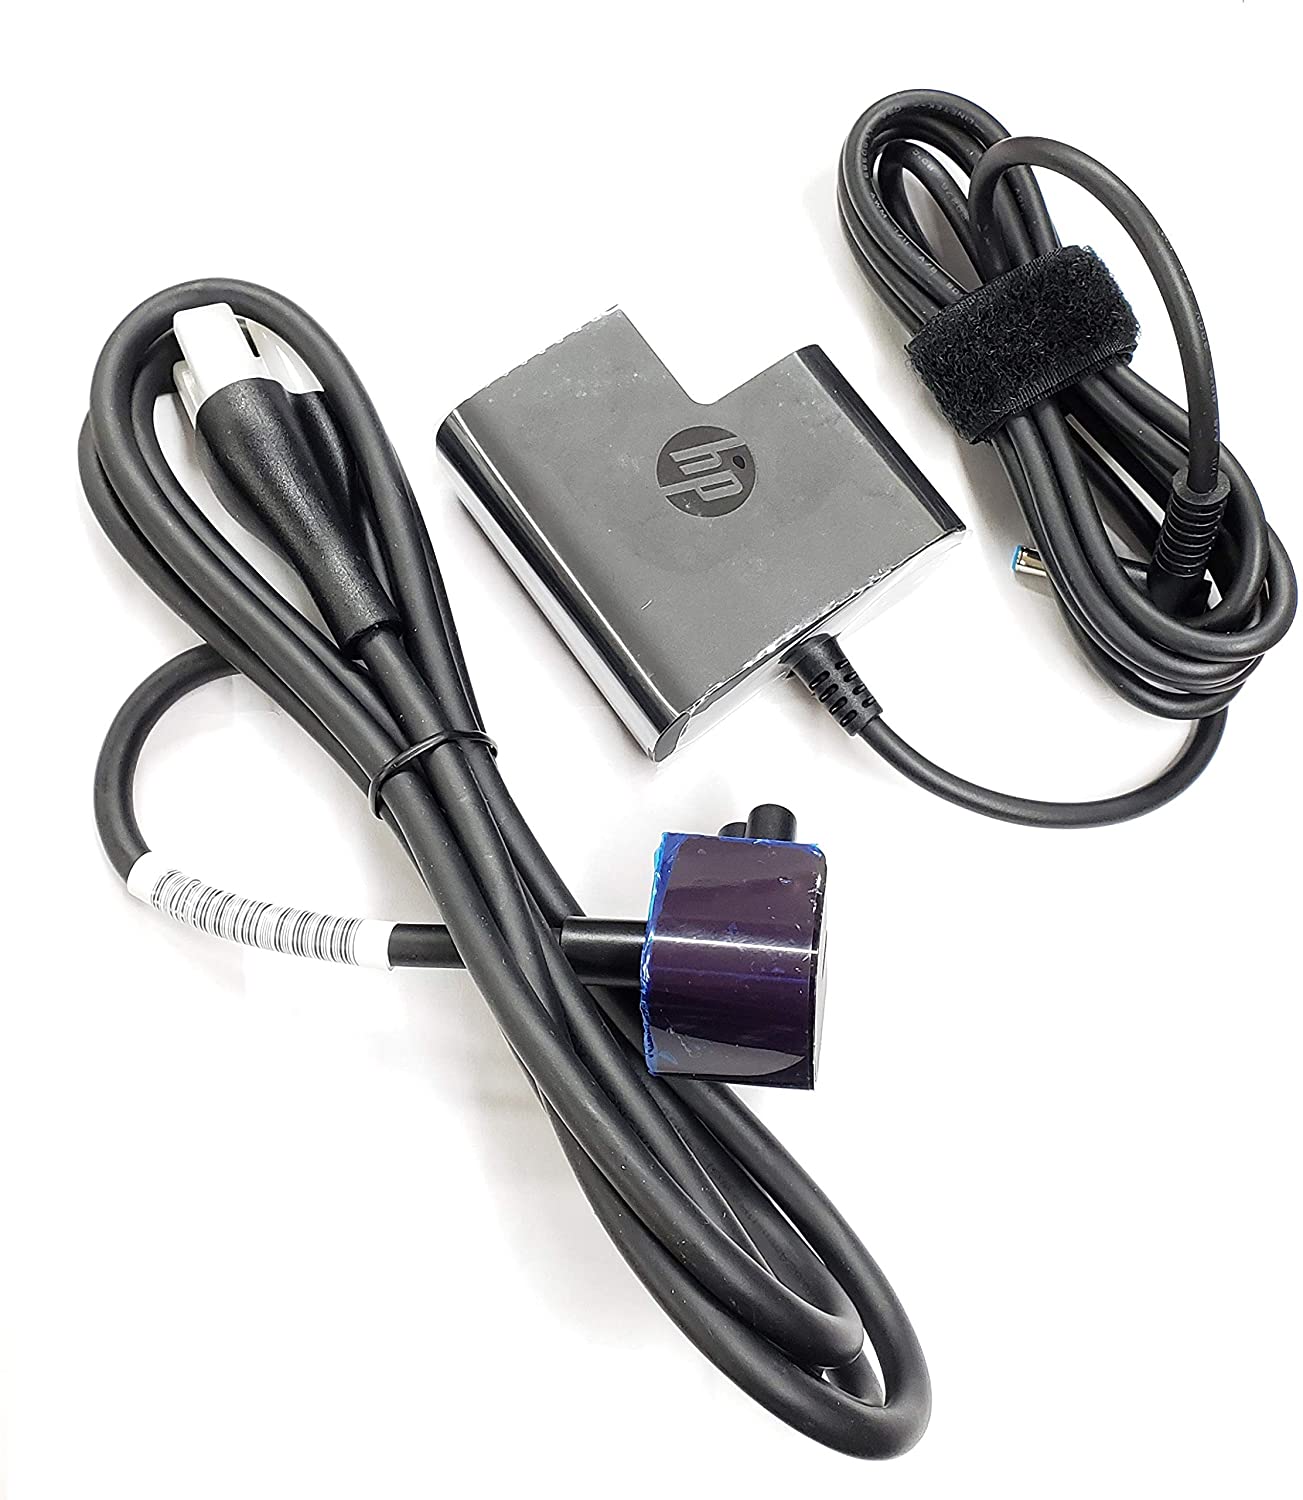 45W Original HP Envy x360 13-ag0007ur Charger AC Adapter Power Supply